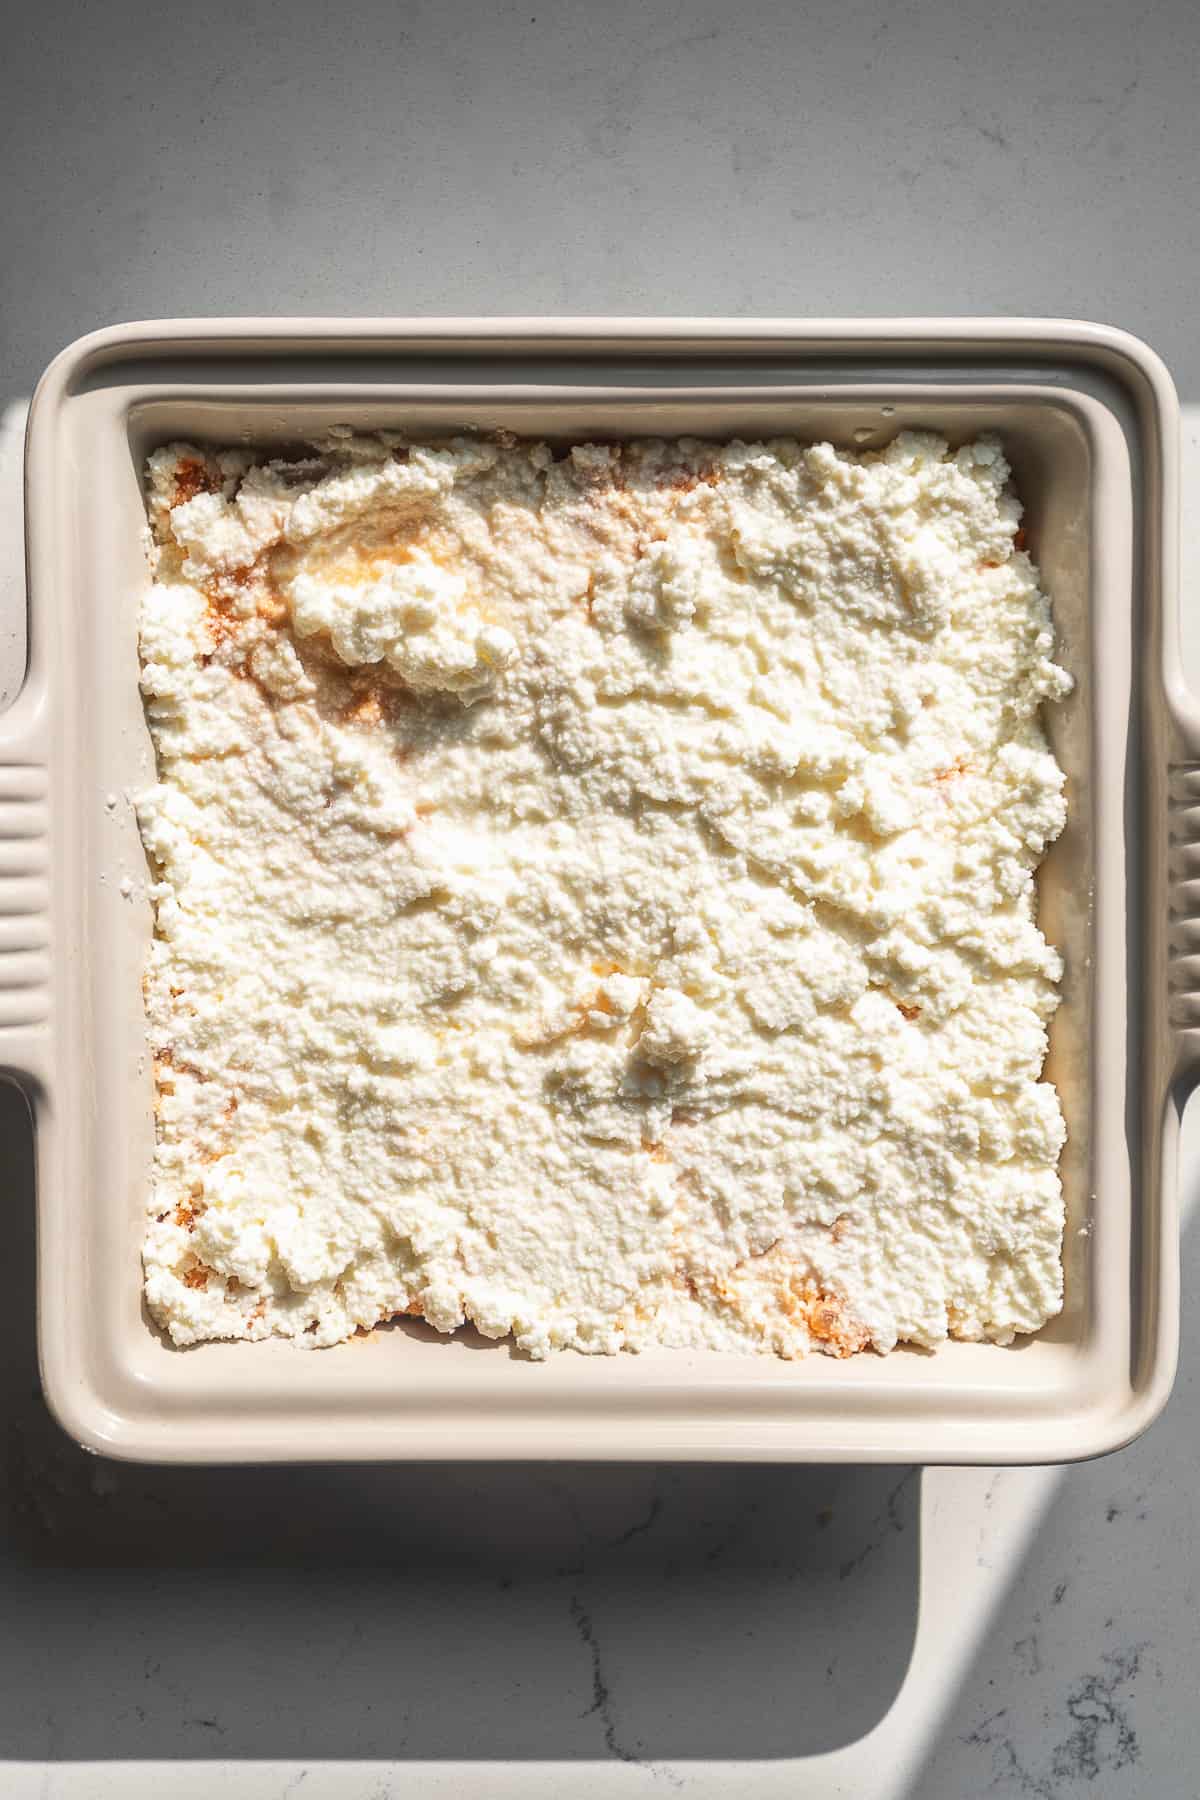 Ricotta cheese spread into a layer on top of ground turkey.